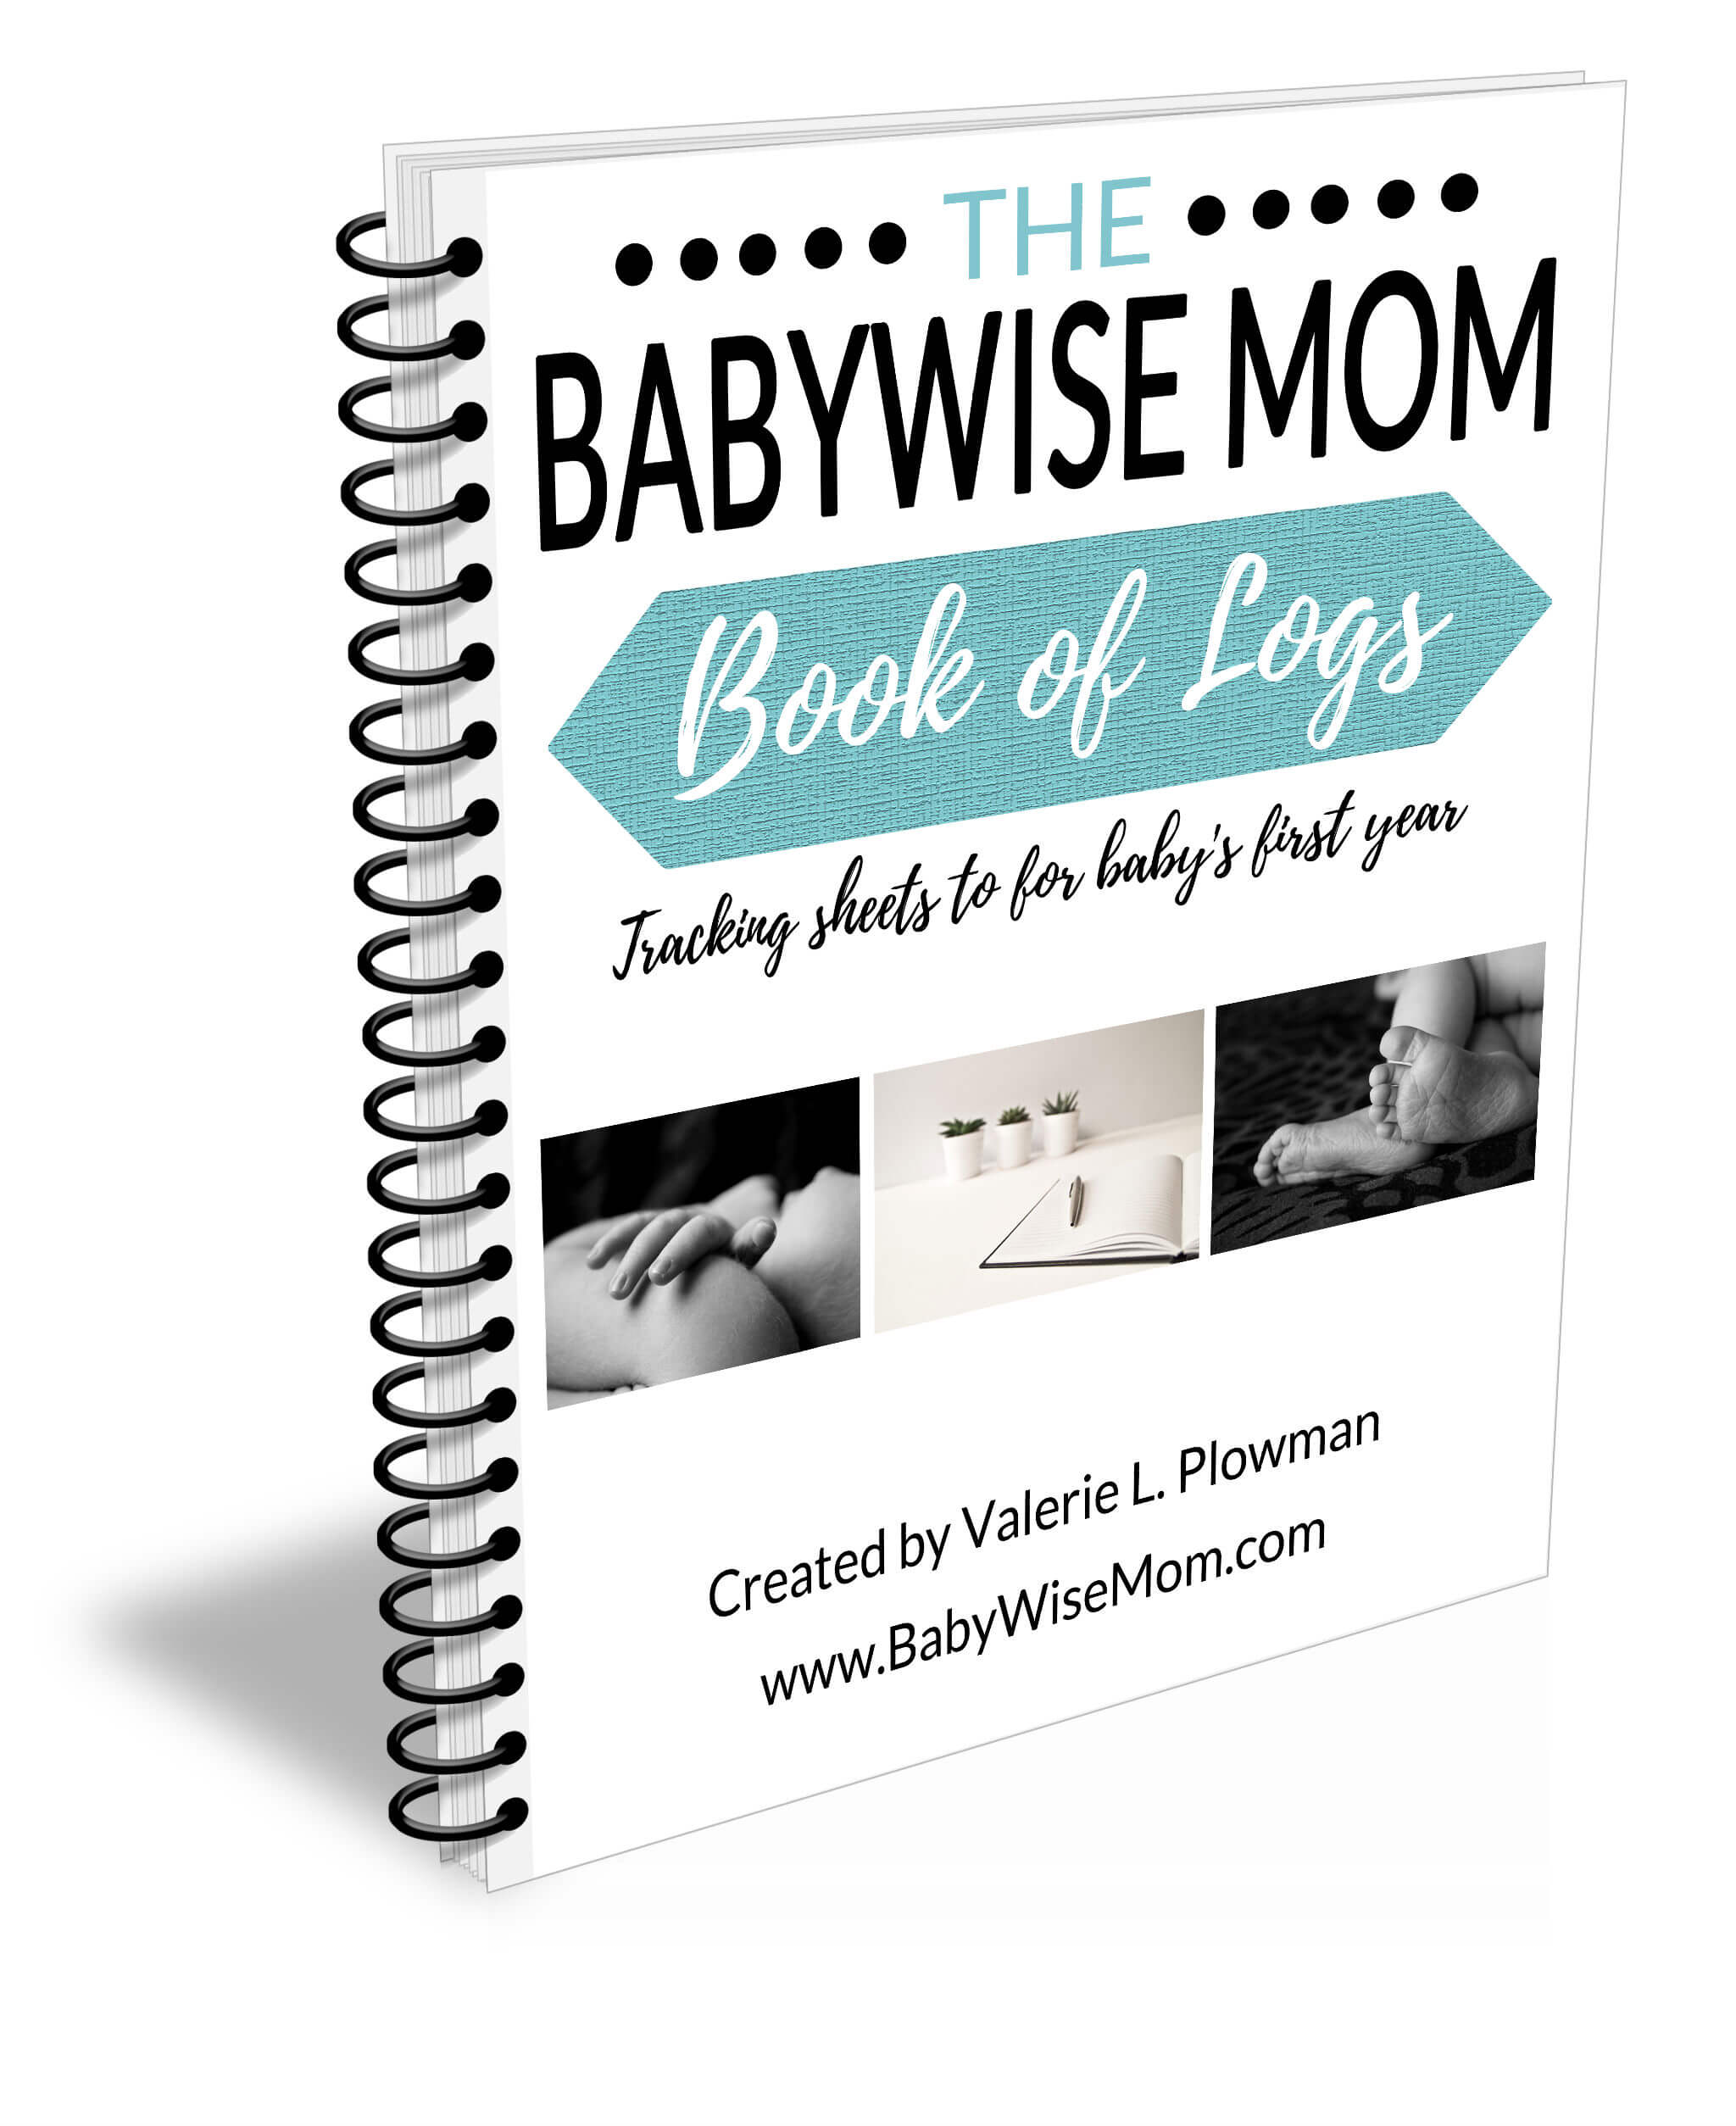 Chronicles of a Babywise Mom Log eBook - Babywise Mom